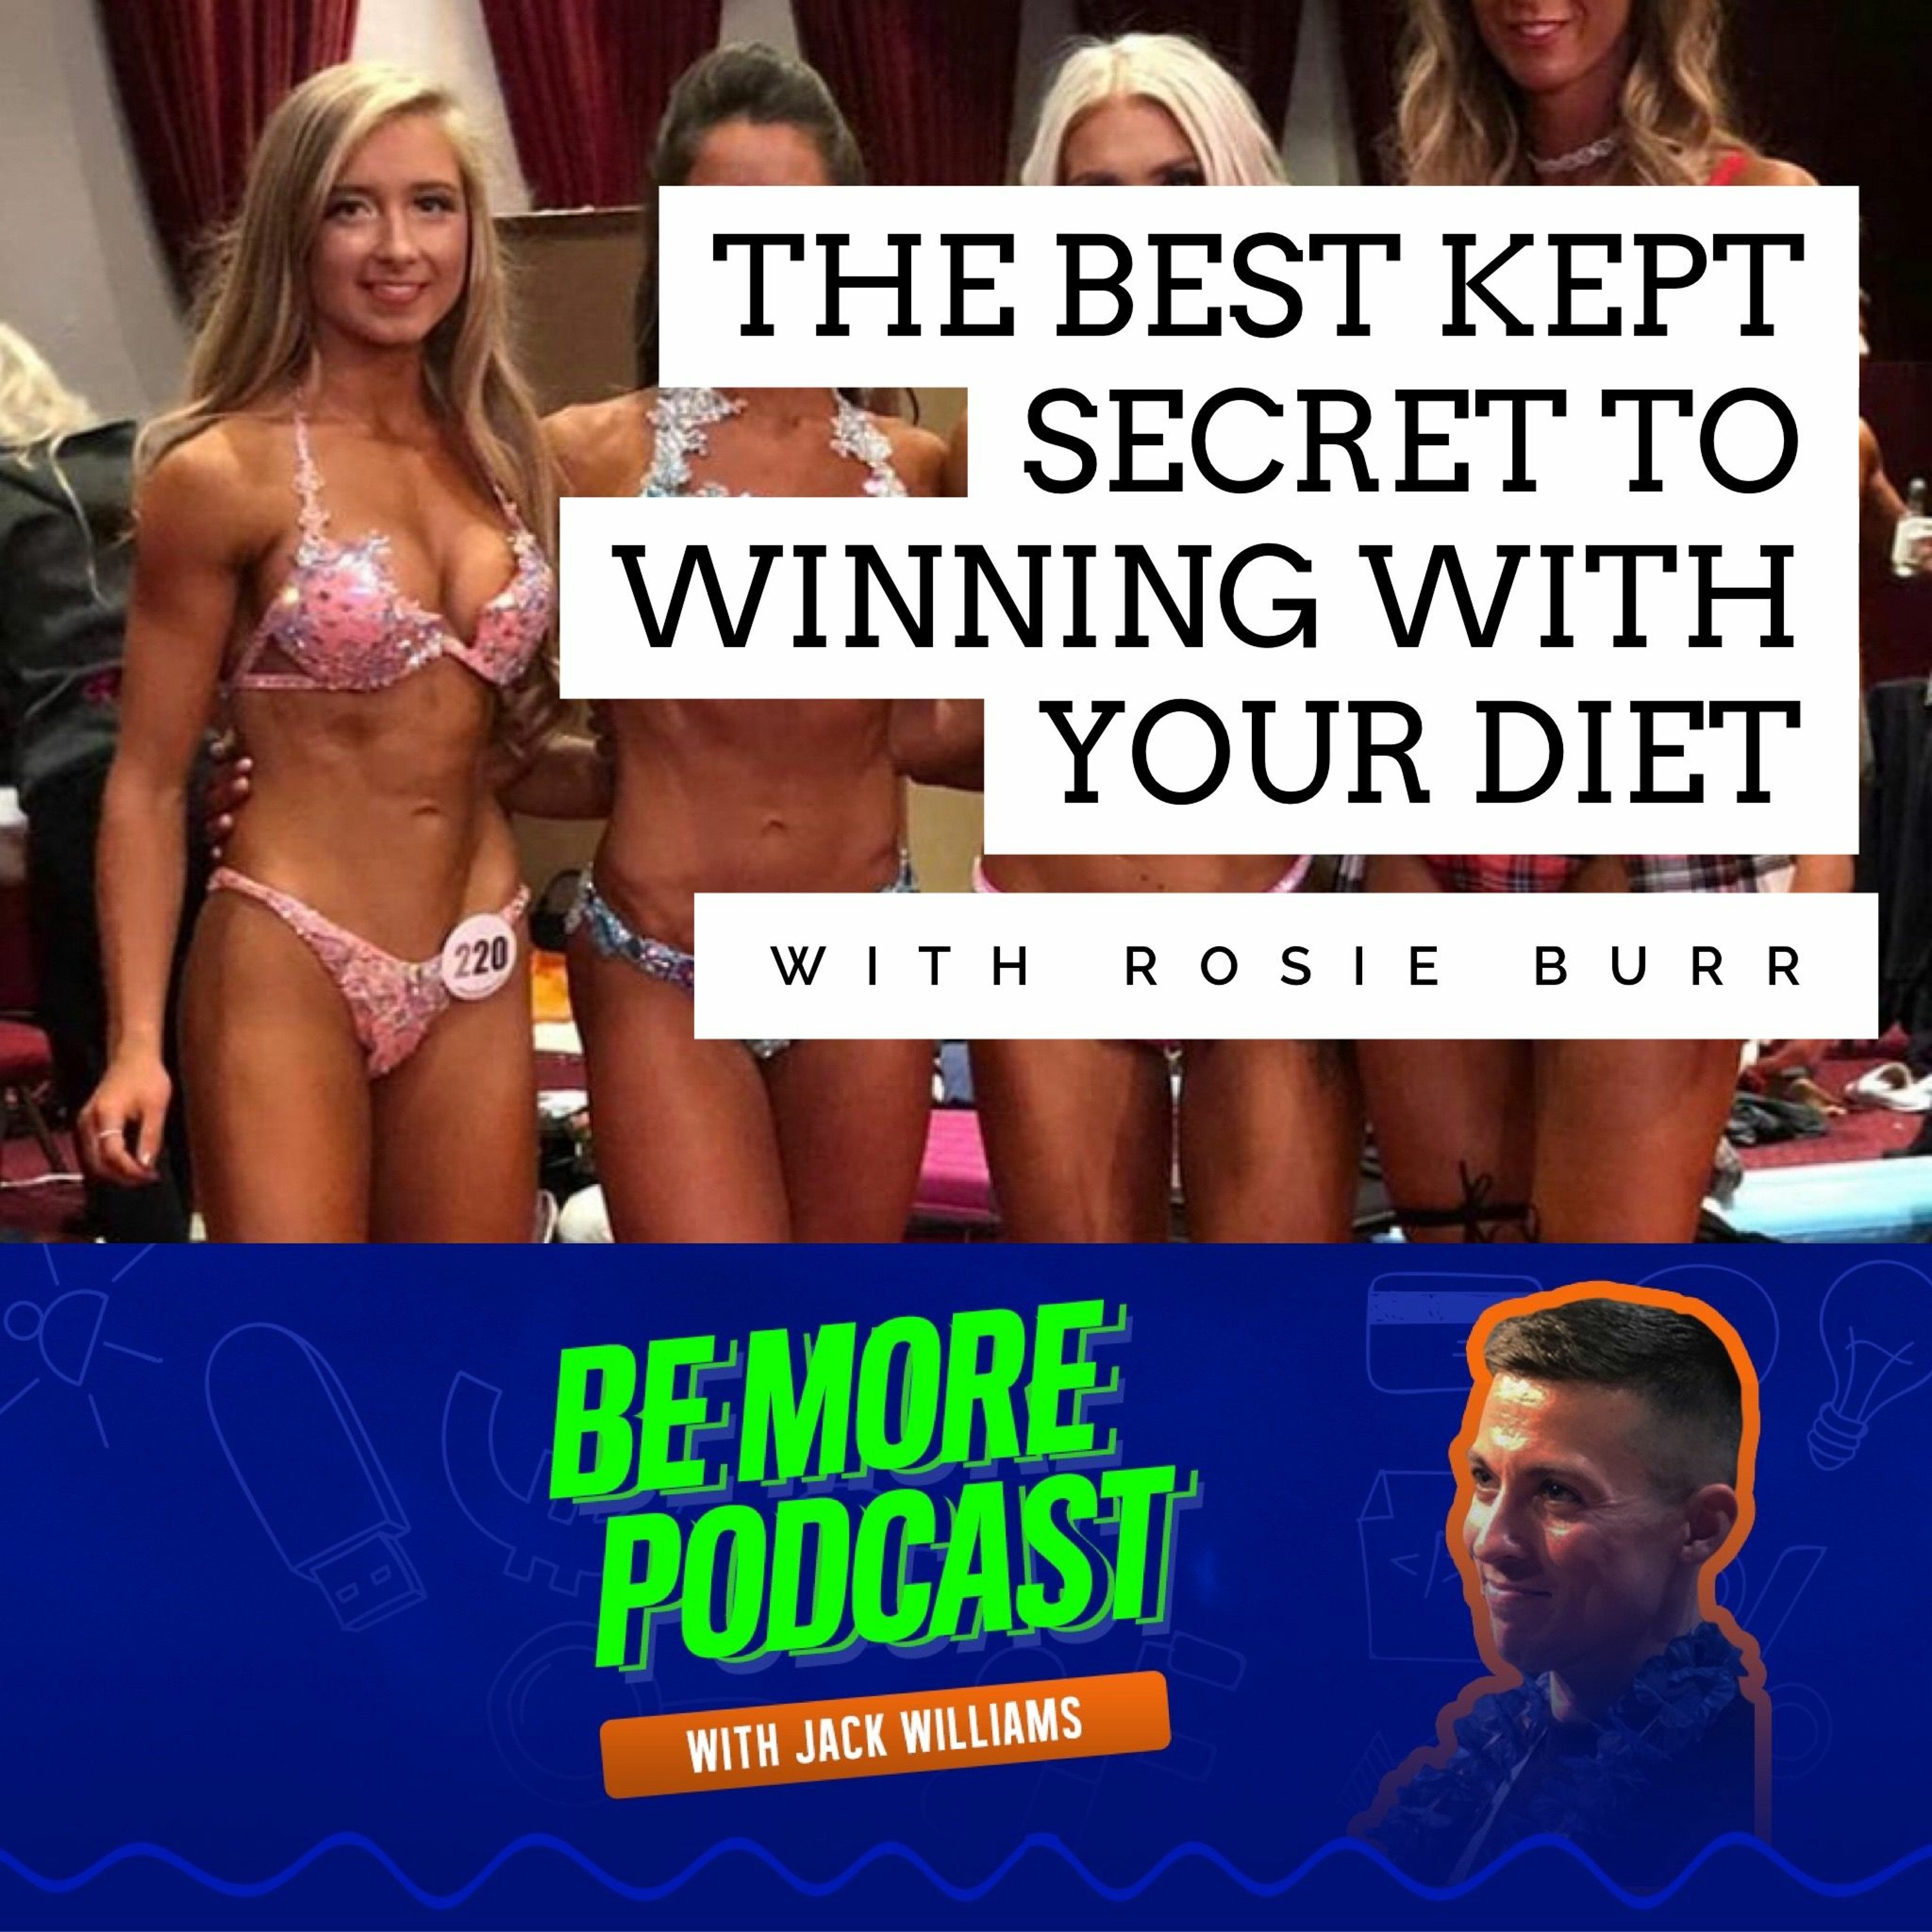 THE BEST KEPT SECRET TO WINNING WITH YOUR DIET! WITH ROSIE BURR PT 2